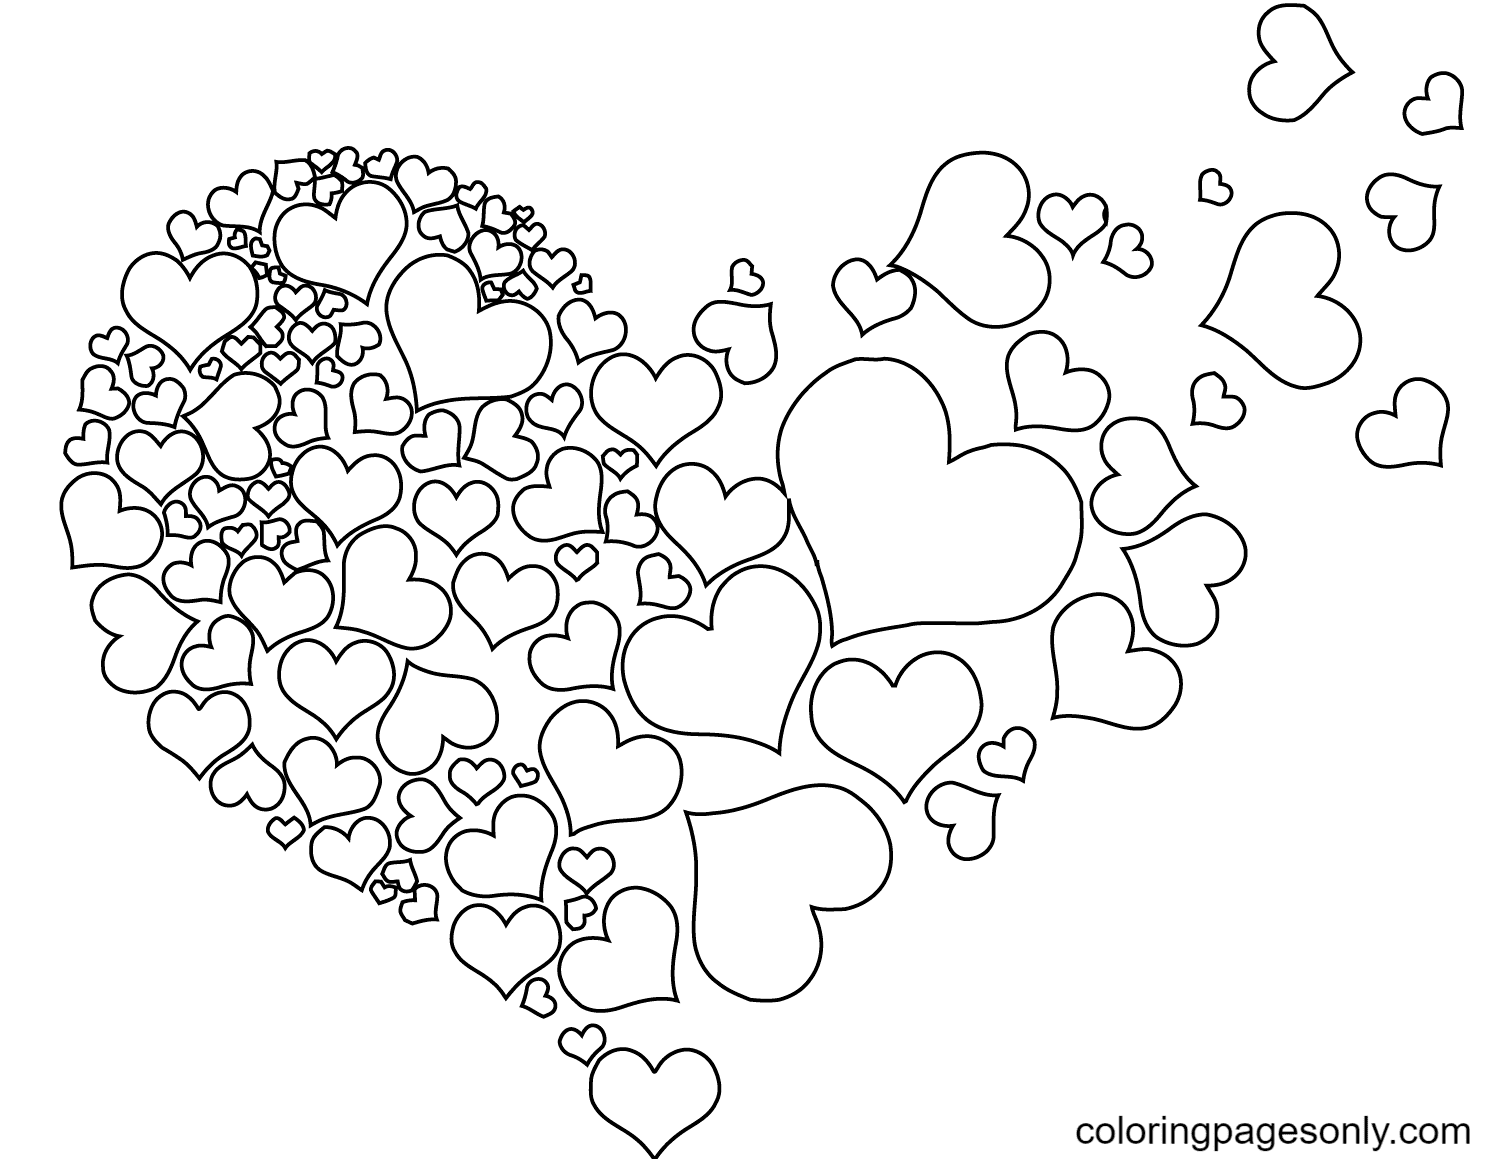 Torn Heart Coloring Page